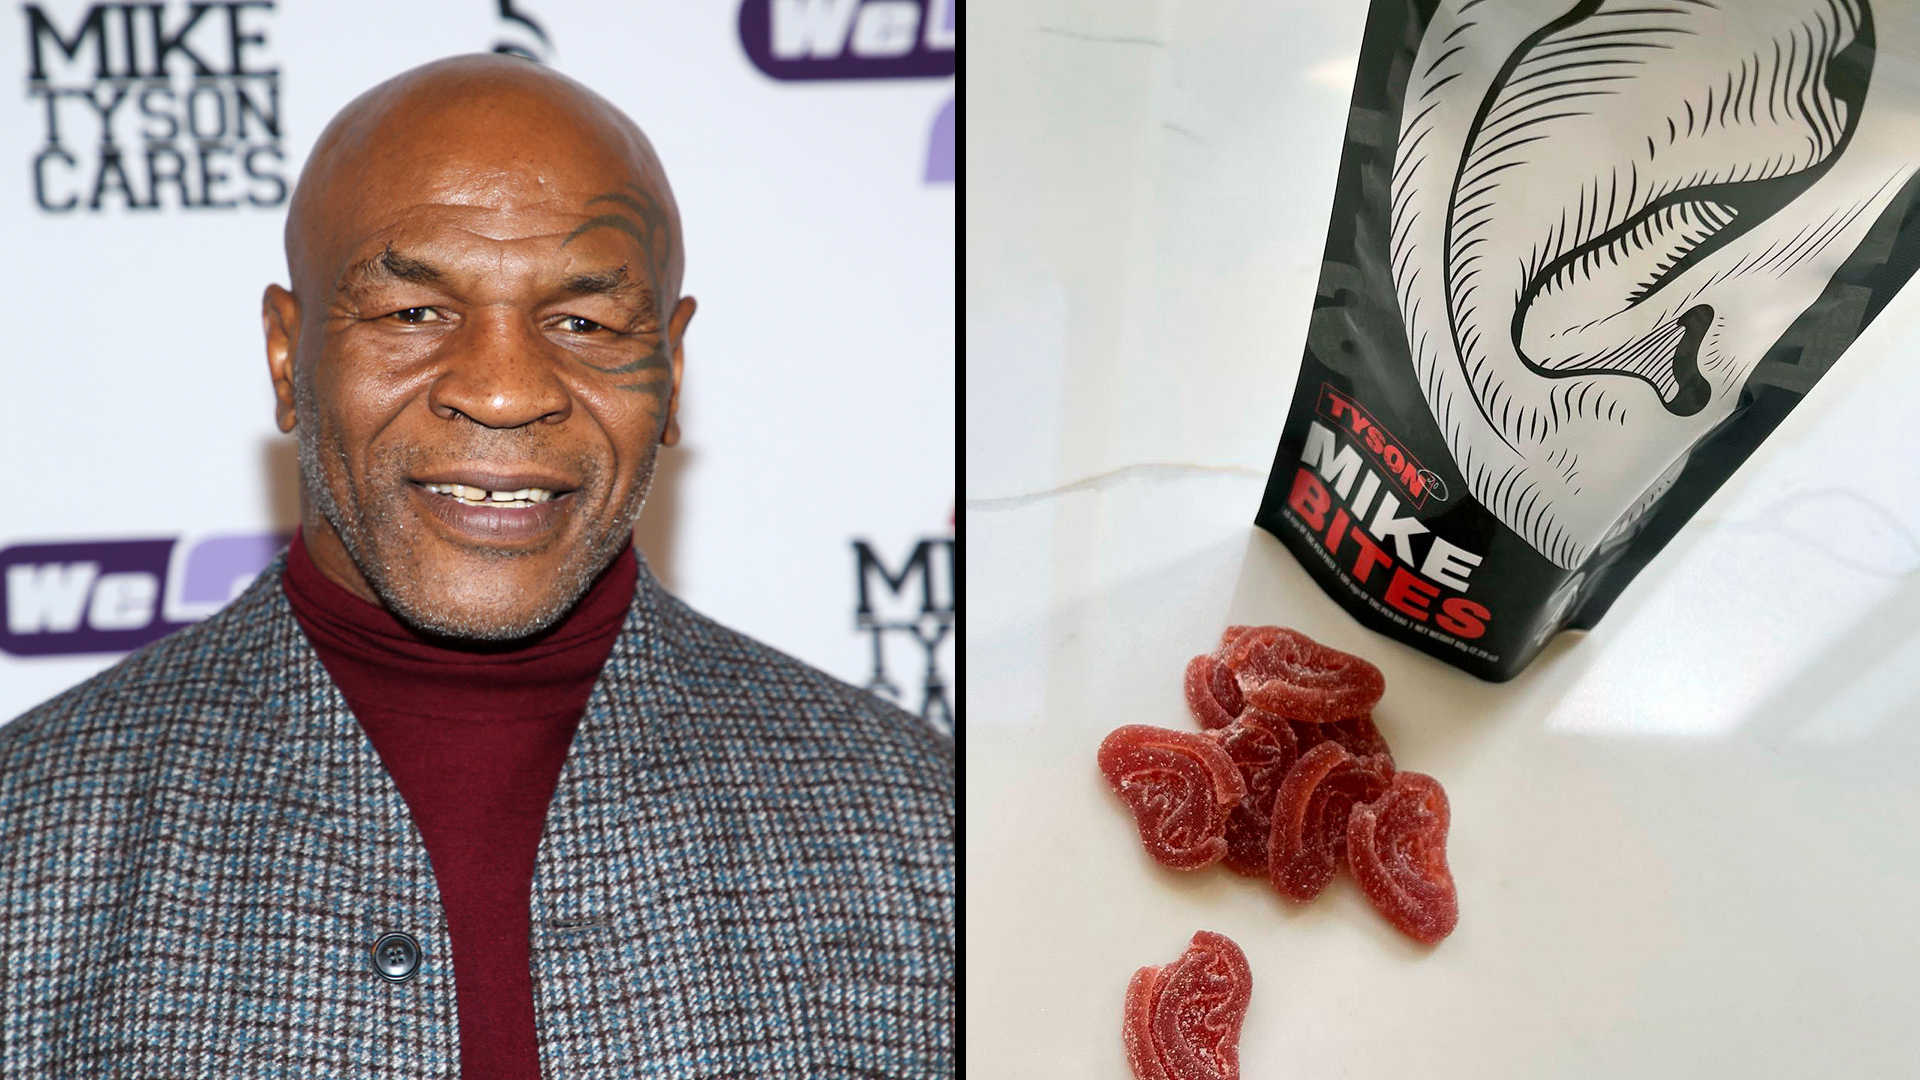 Here's The Reason Mike Tyson's Ear-Shaped Edibles Are Banned In This U.S. State